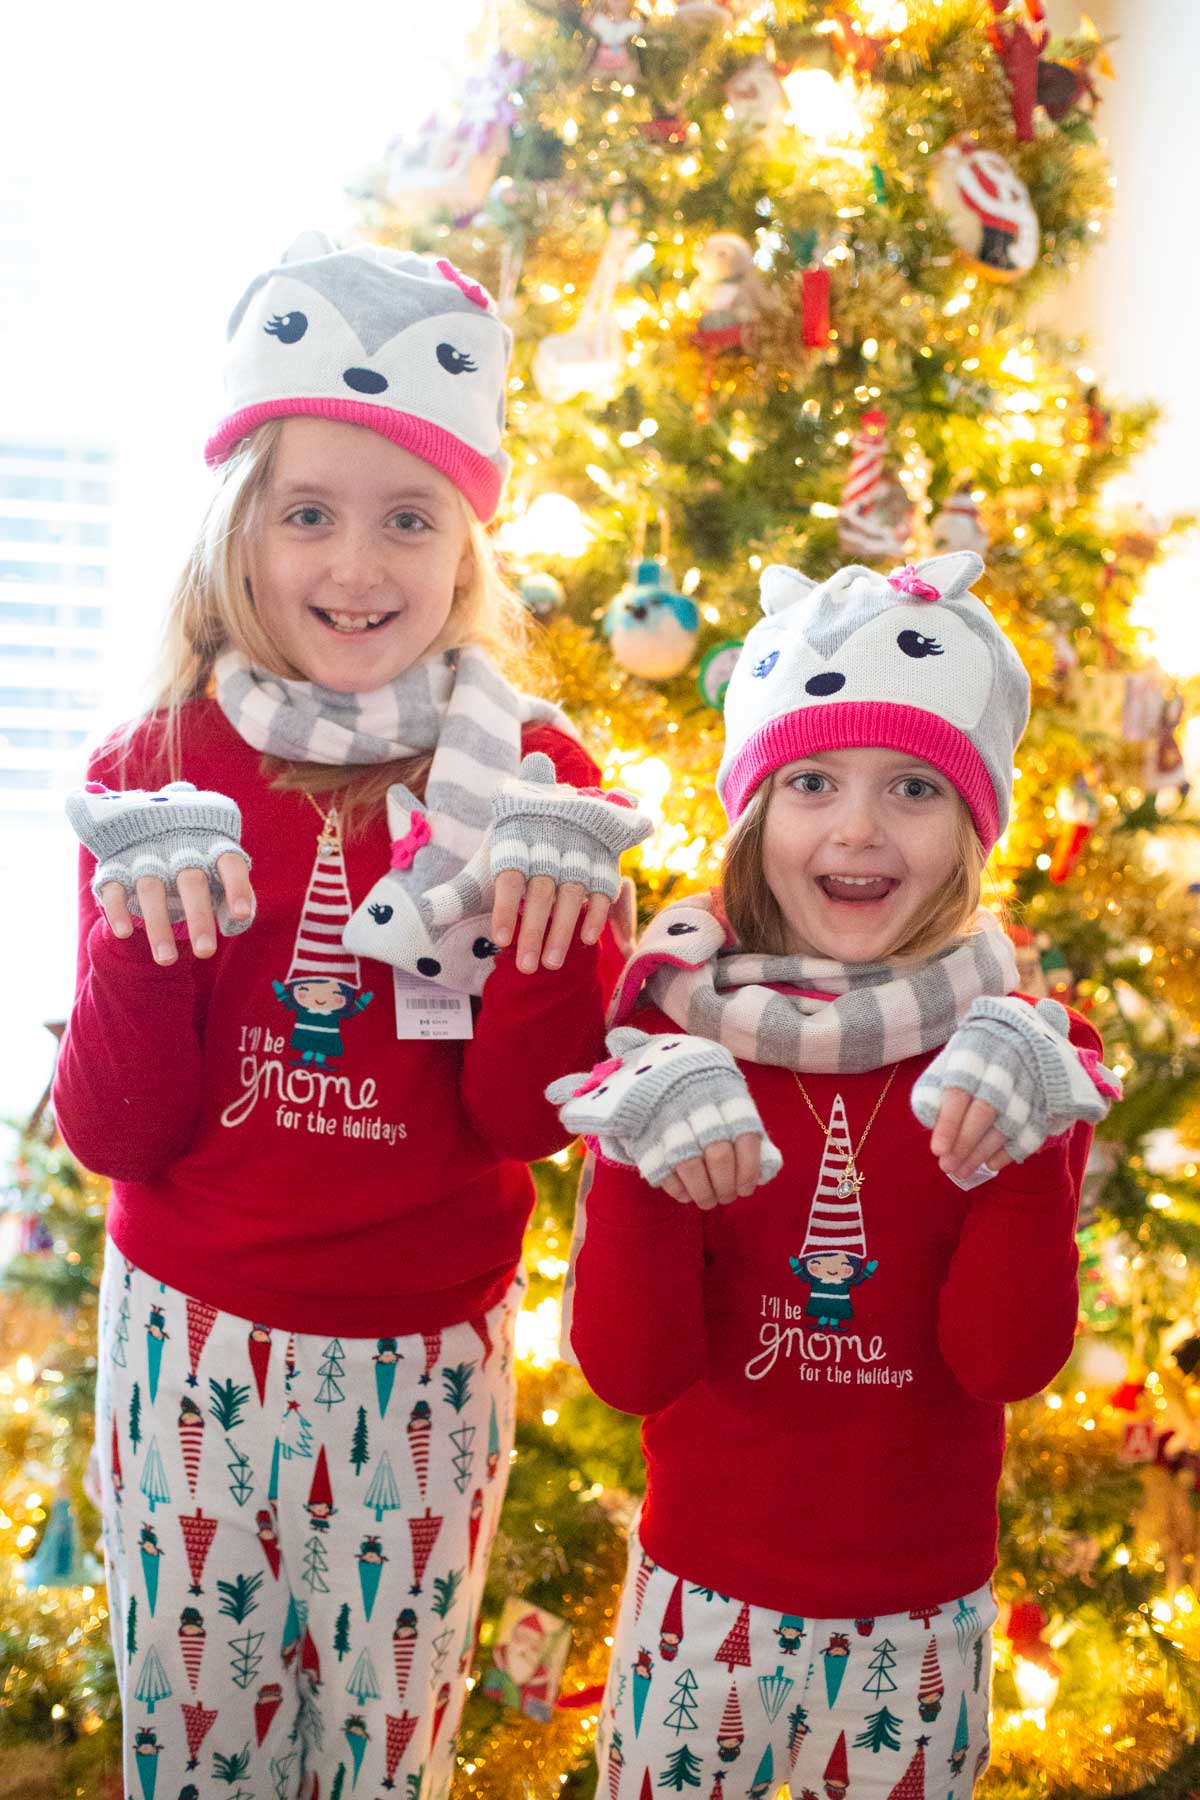 Two young girls wear brand new matching winter hats from St. Nick and are standing in front of a Christmas tree.